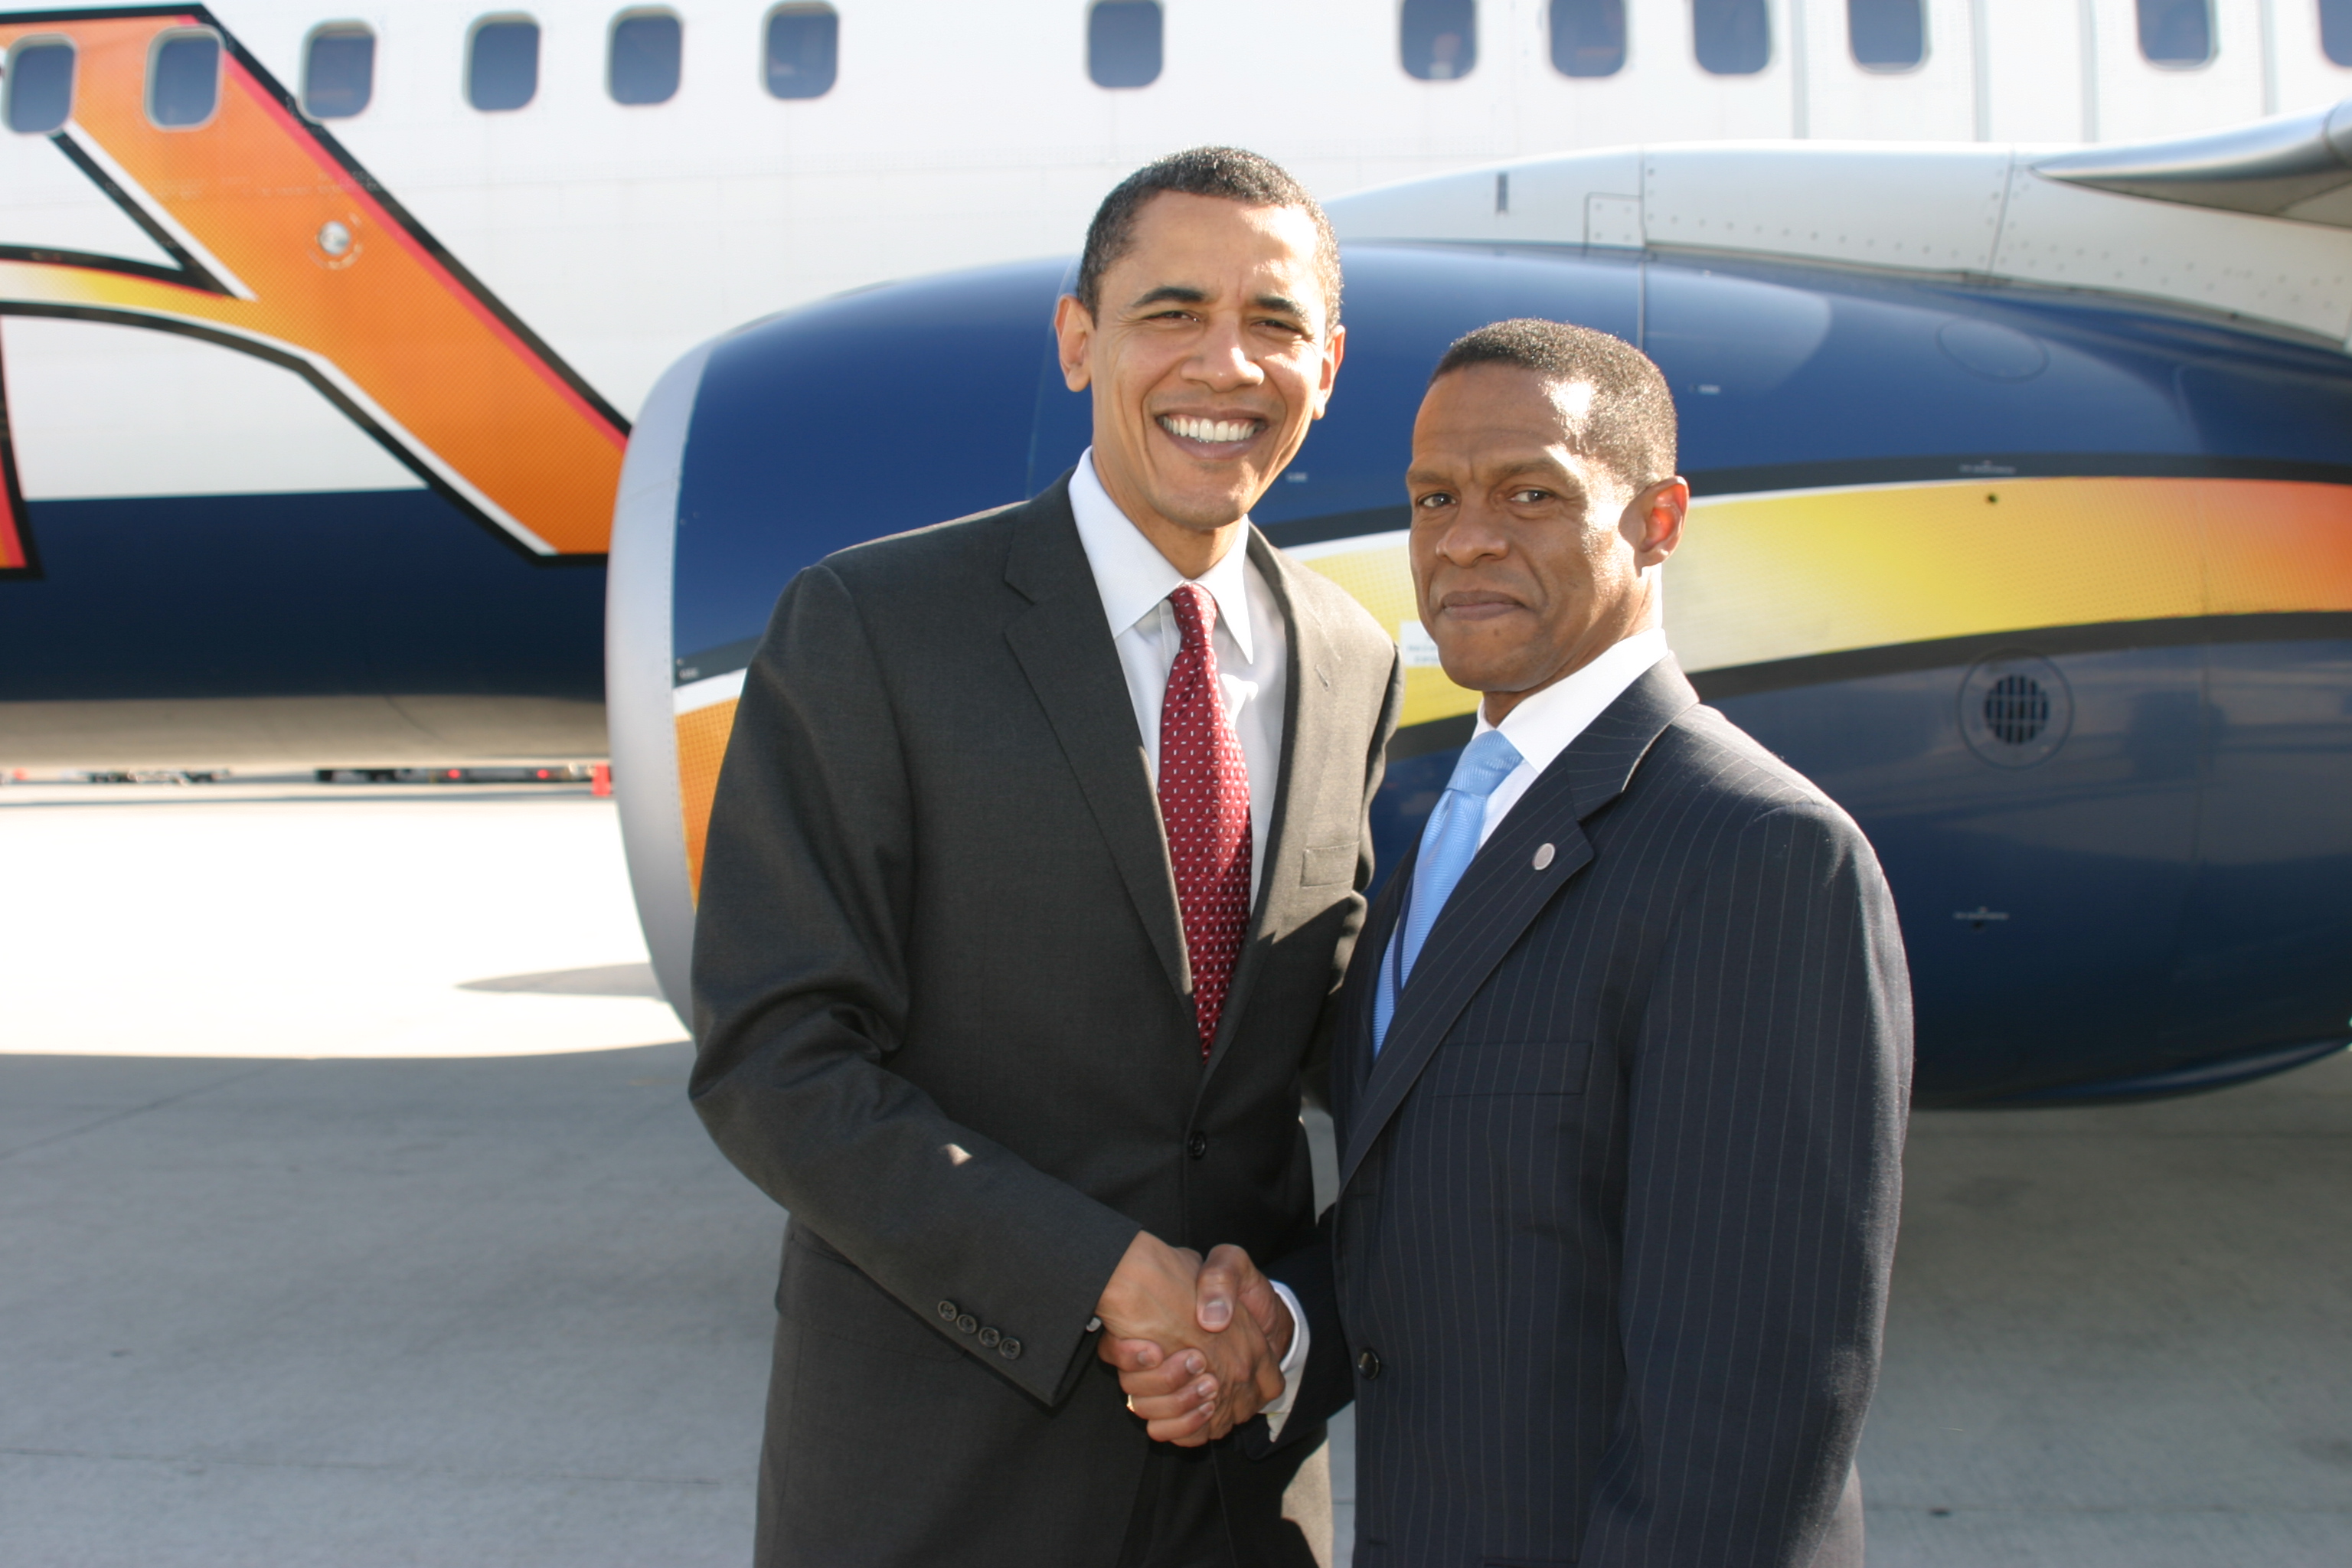 Erroll Southers and President Barack Obama